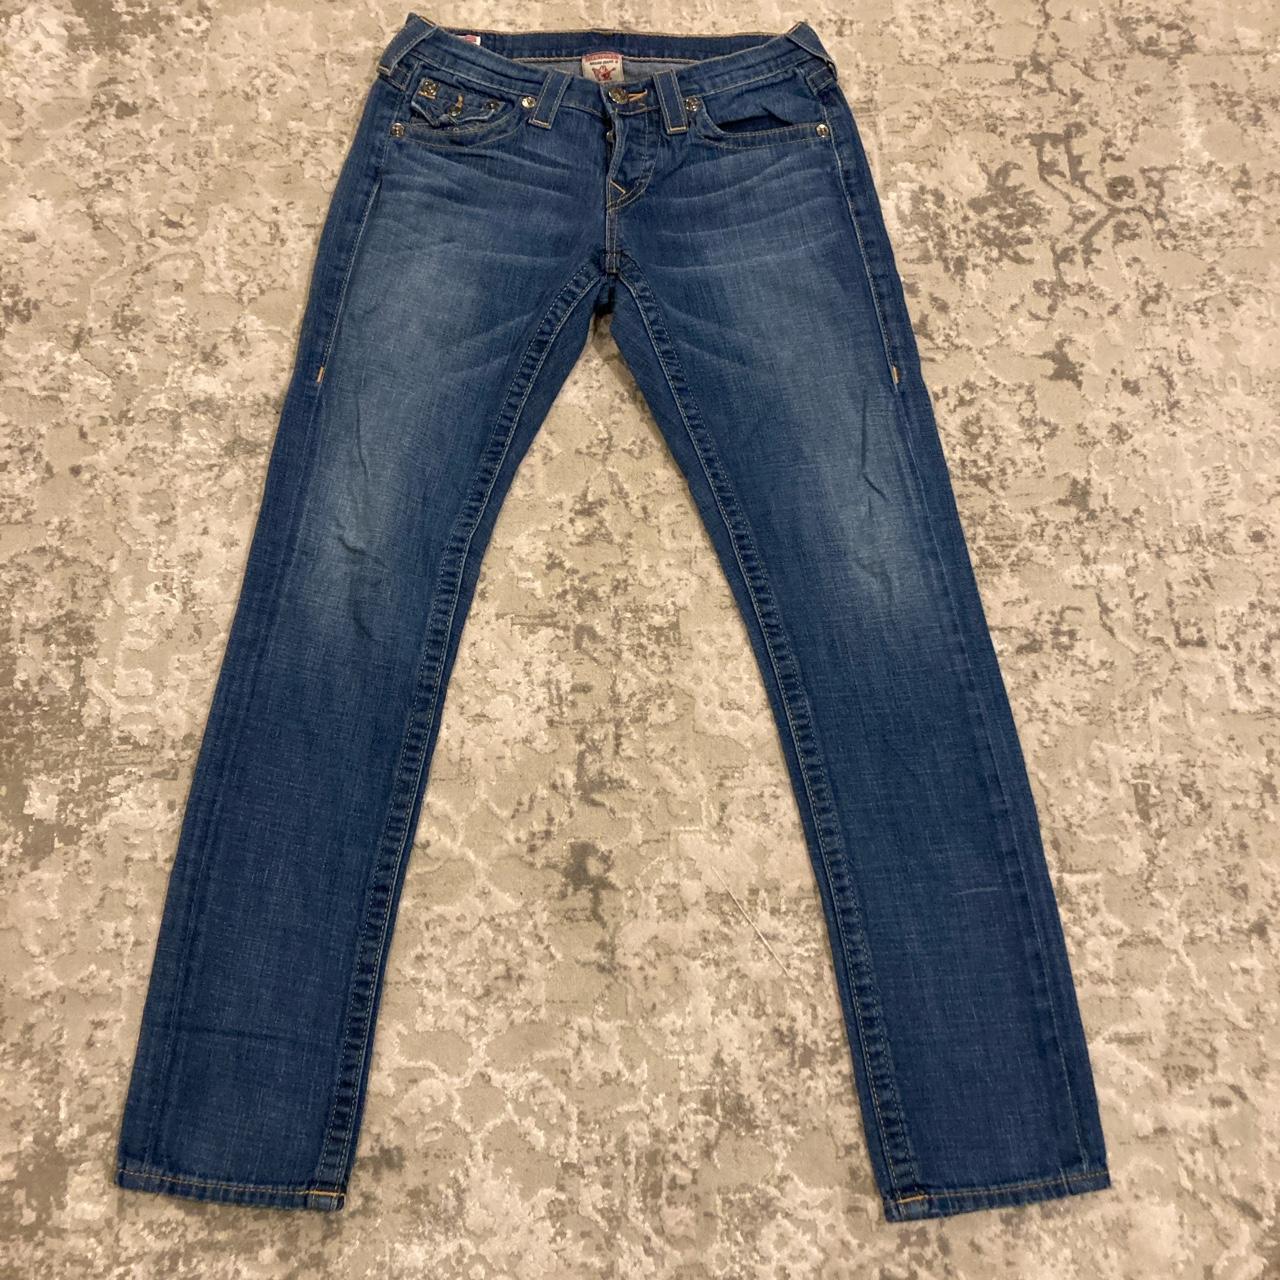 Cute pair of True Religiom straight fit jeans in a... - Depop